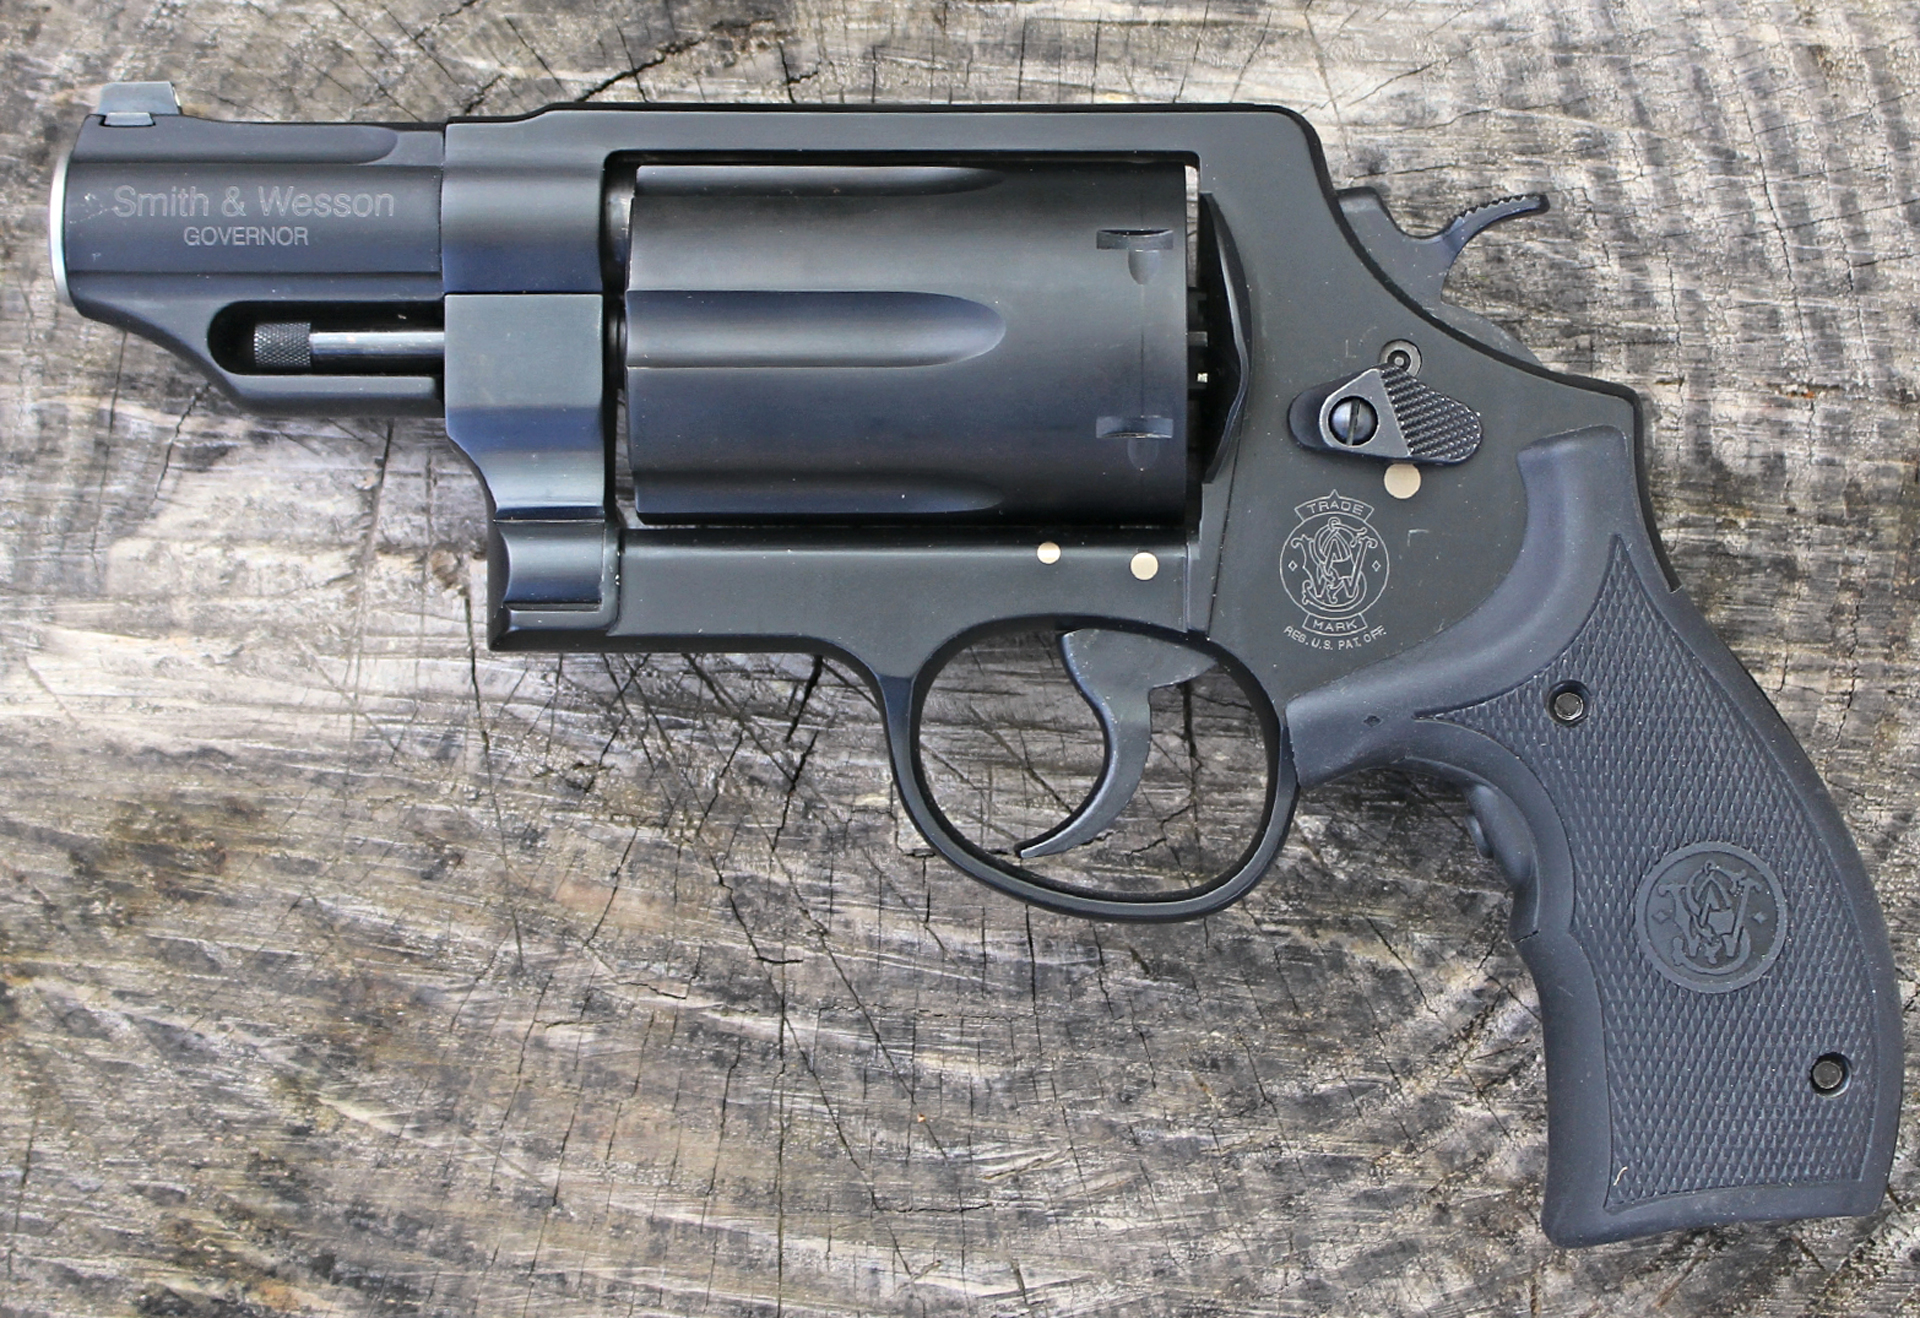 The Smith & Wesson Governor has a six-shot cylinder milled for moon clips so that it can fire .45 ACP pistol cartridges in addition to .45 Colt and .410 bore.